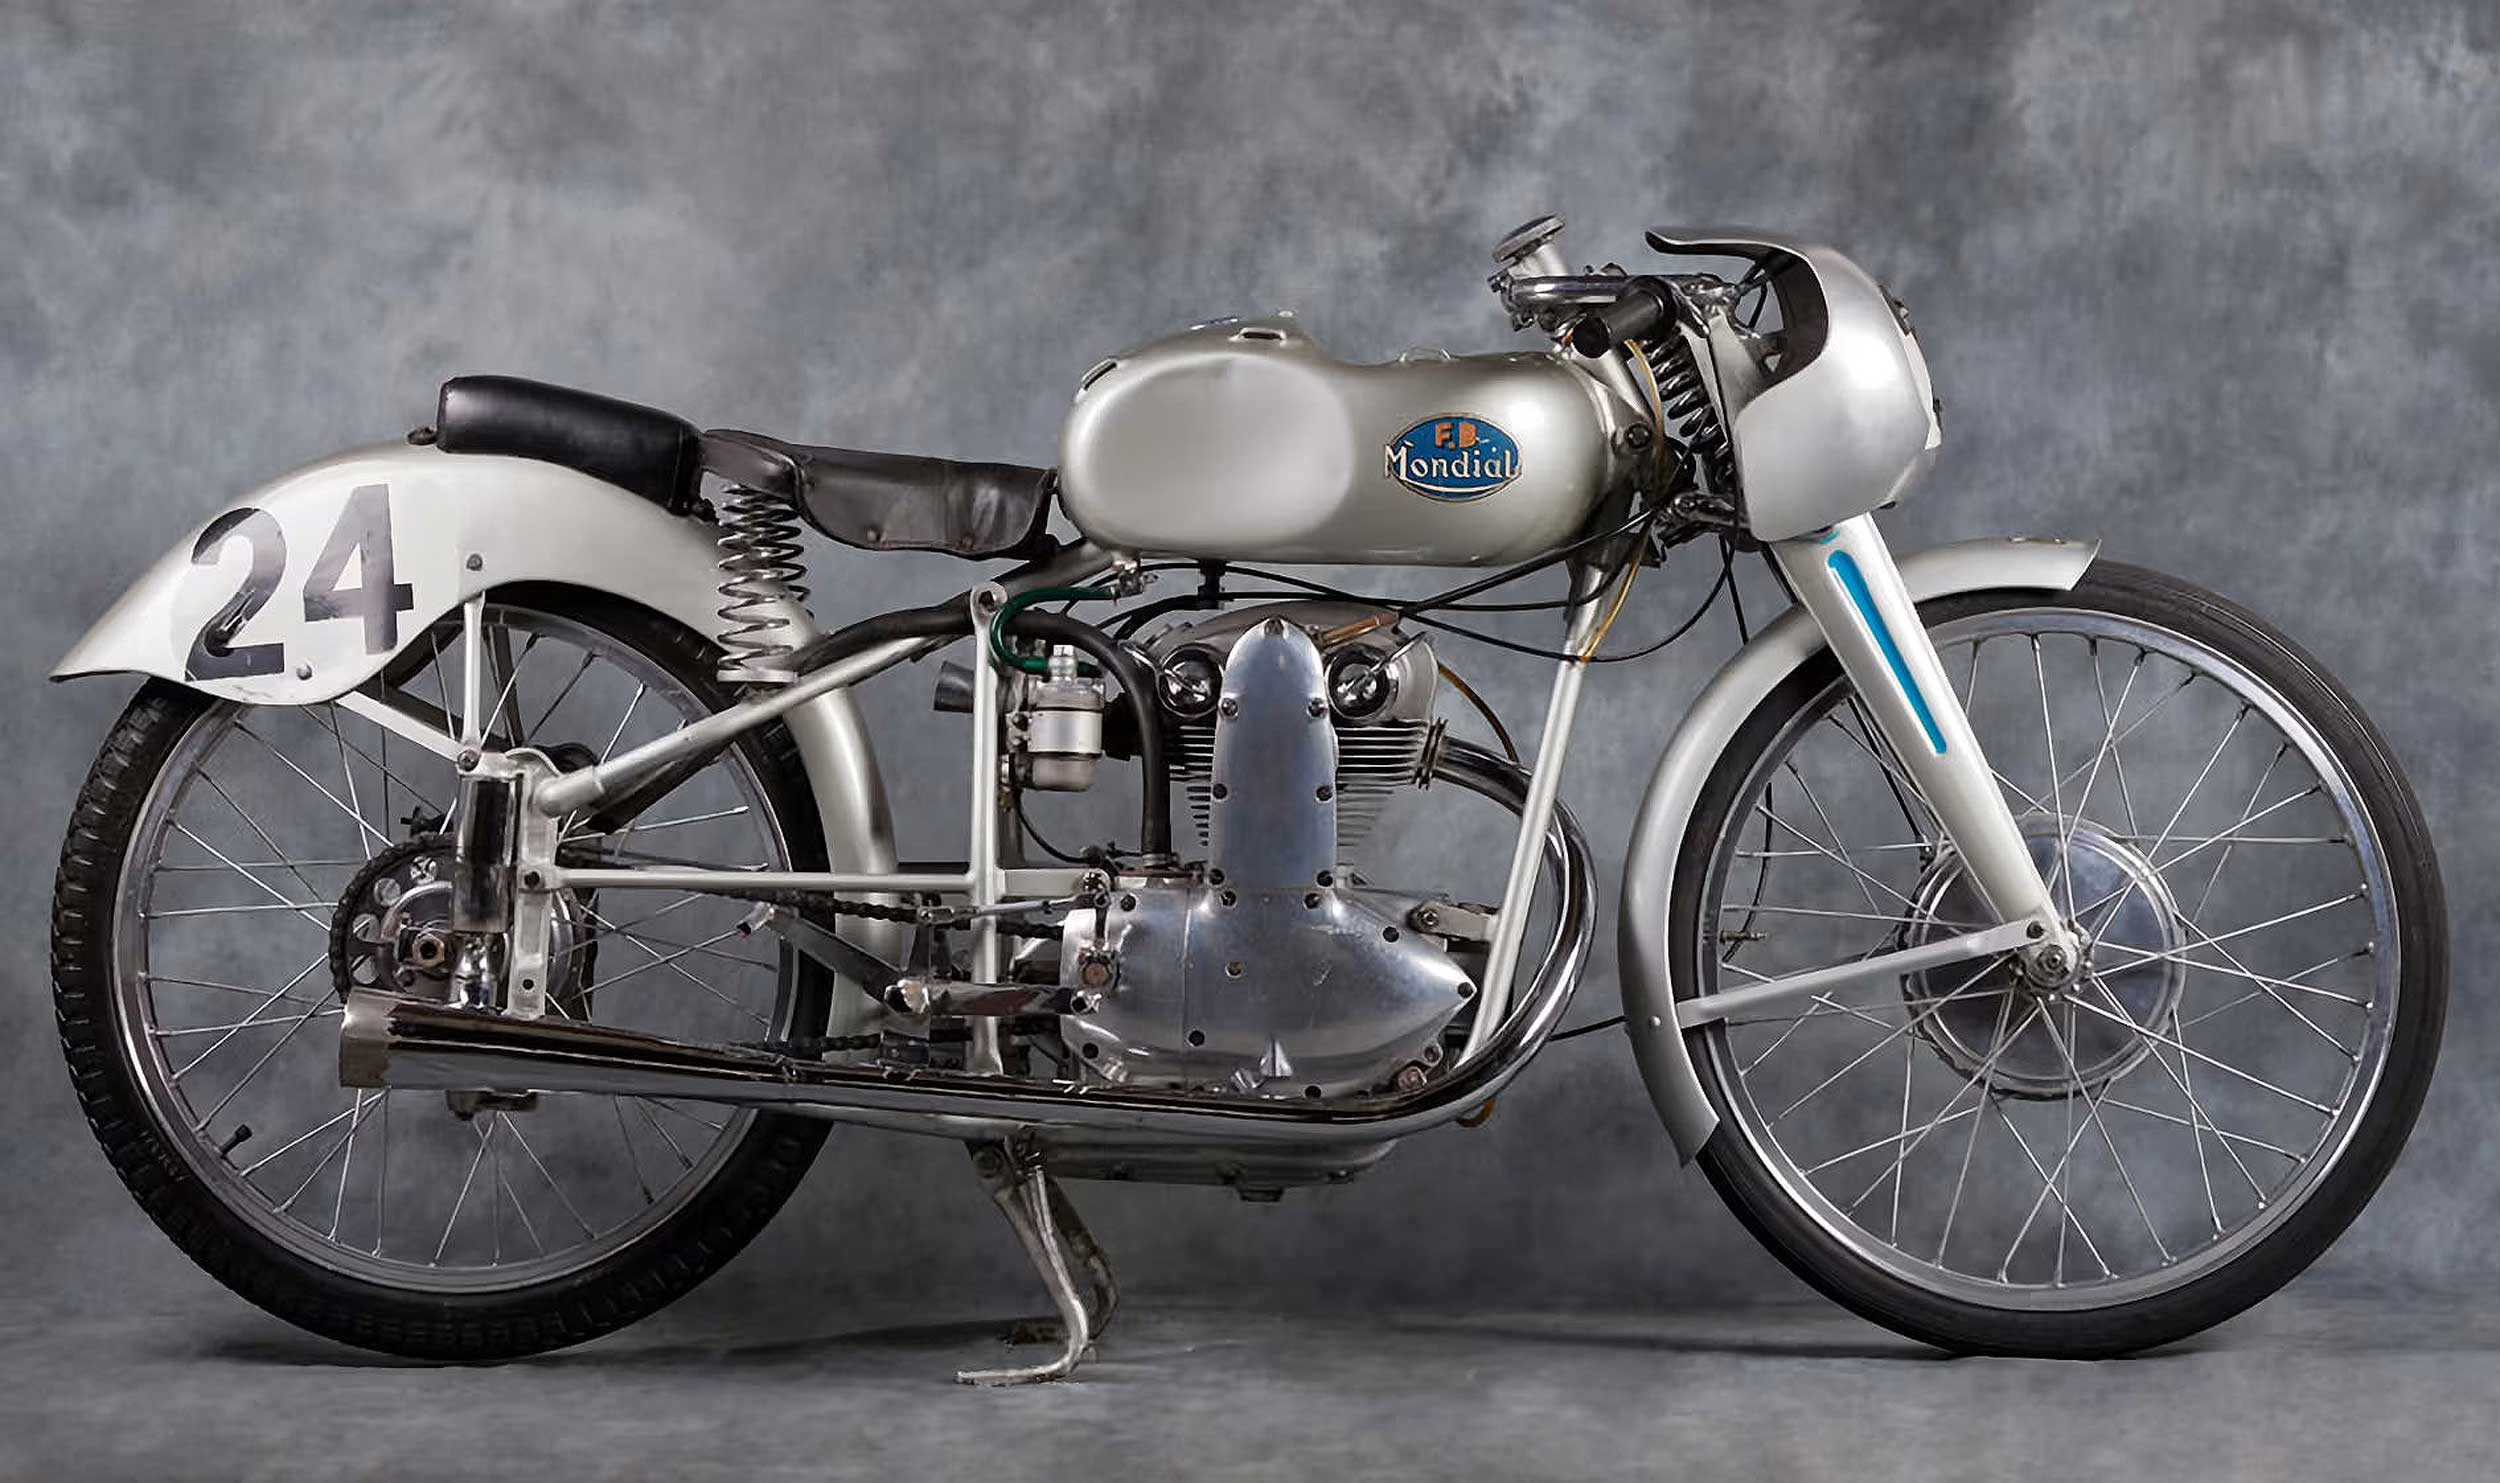 1952 Mondial 125 Monoalbero GP in original unrestored condition, as raced by factory riders and privateers